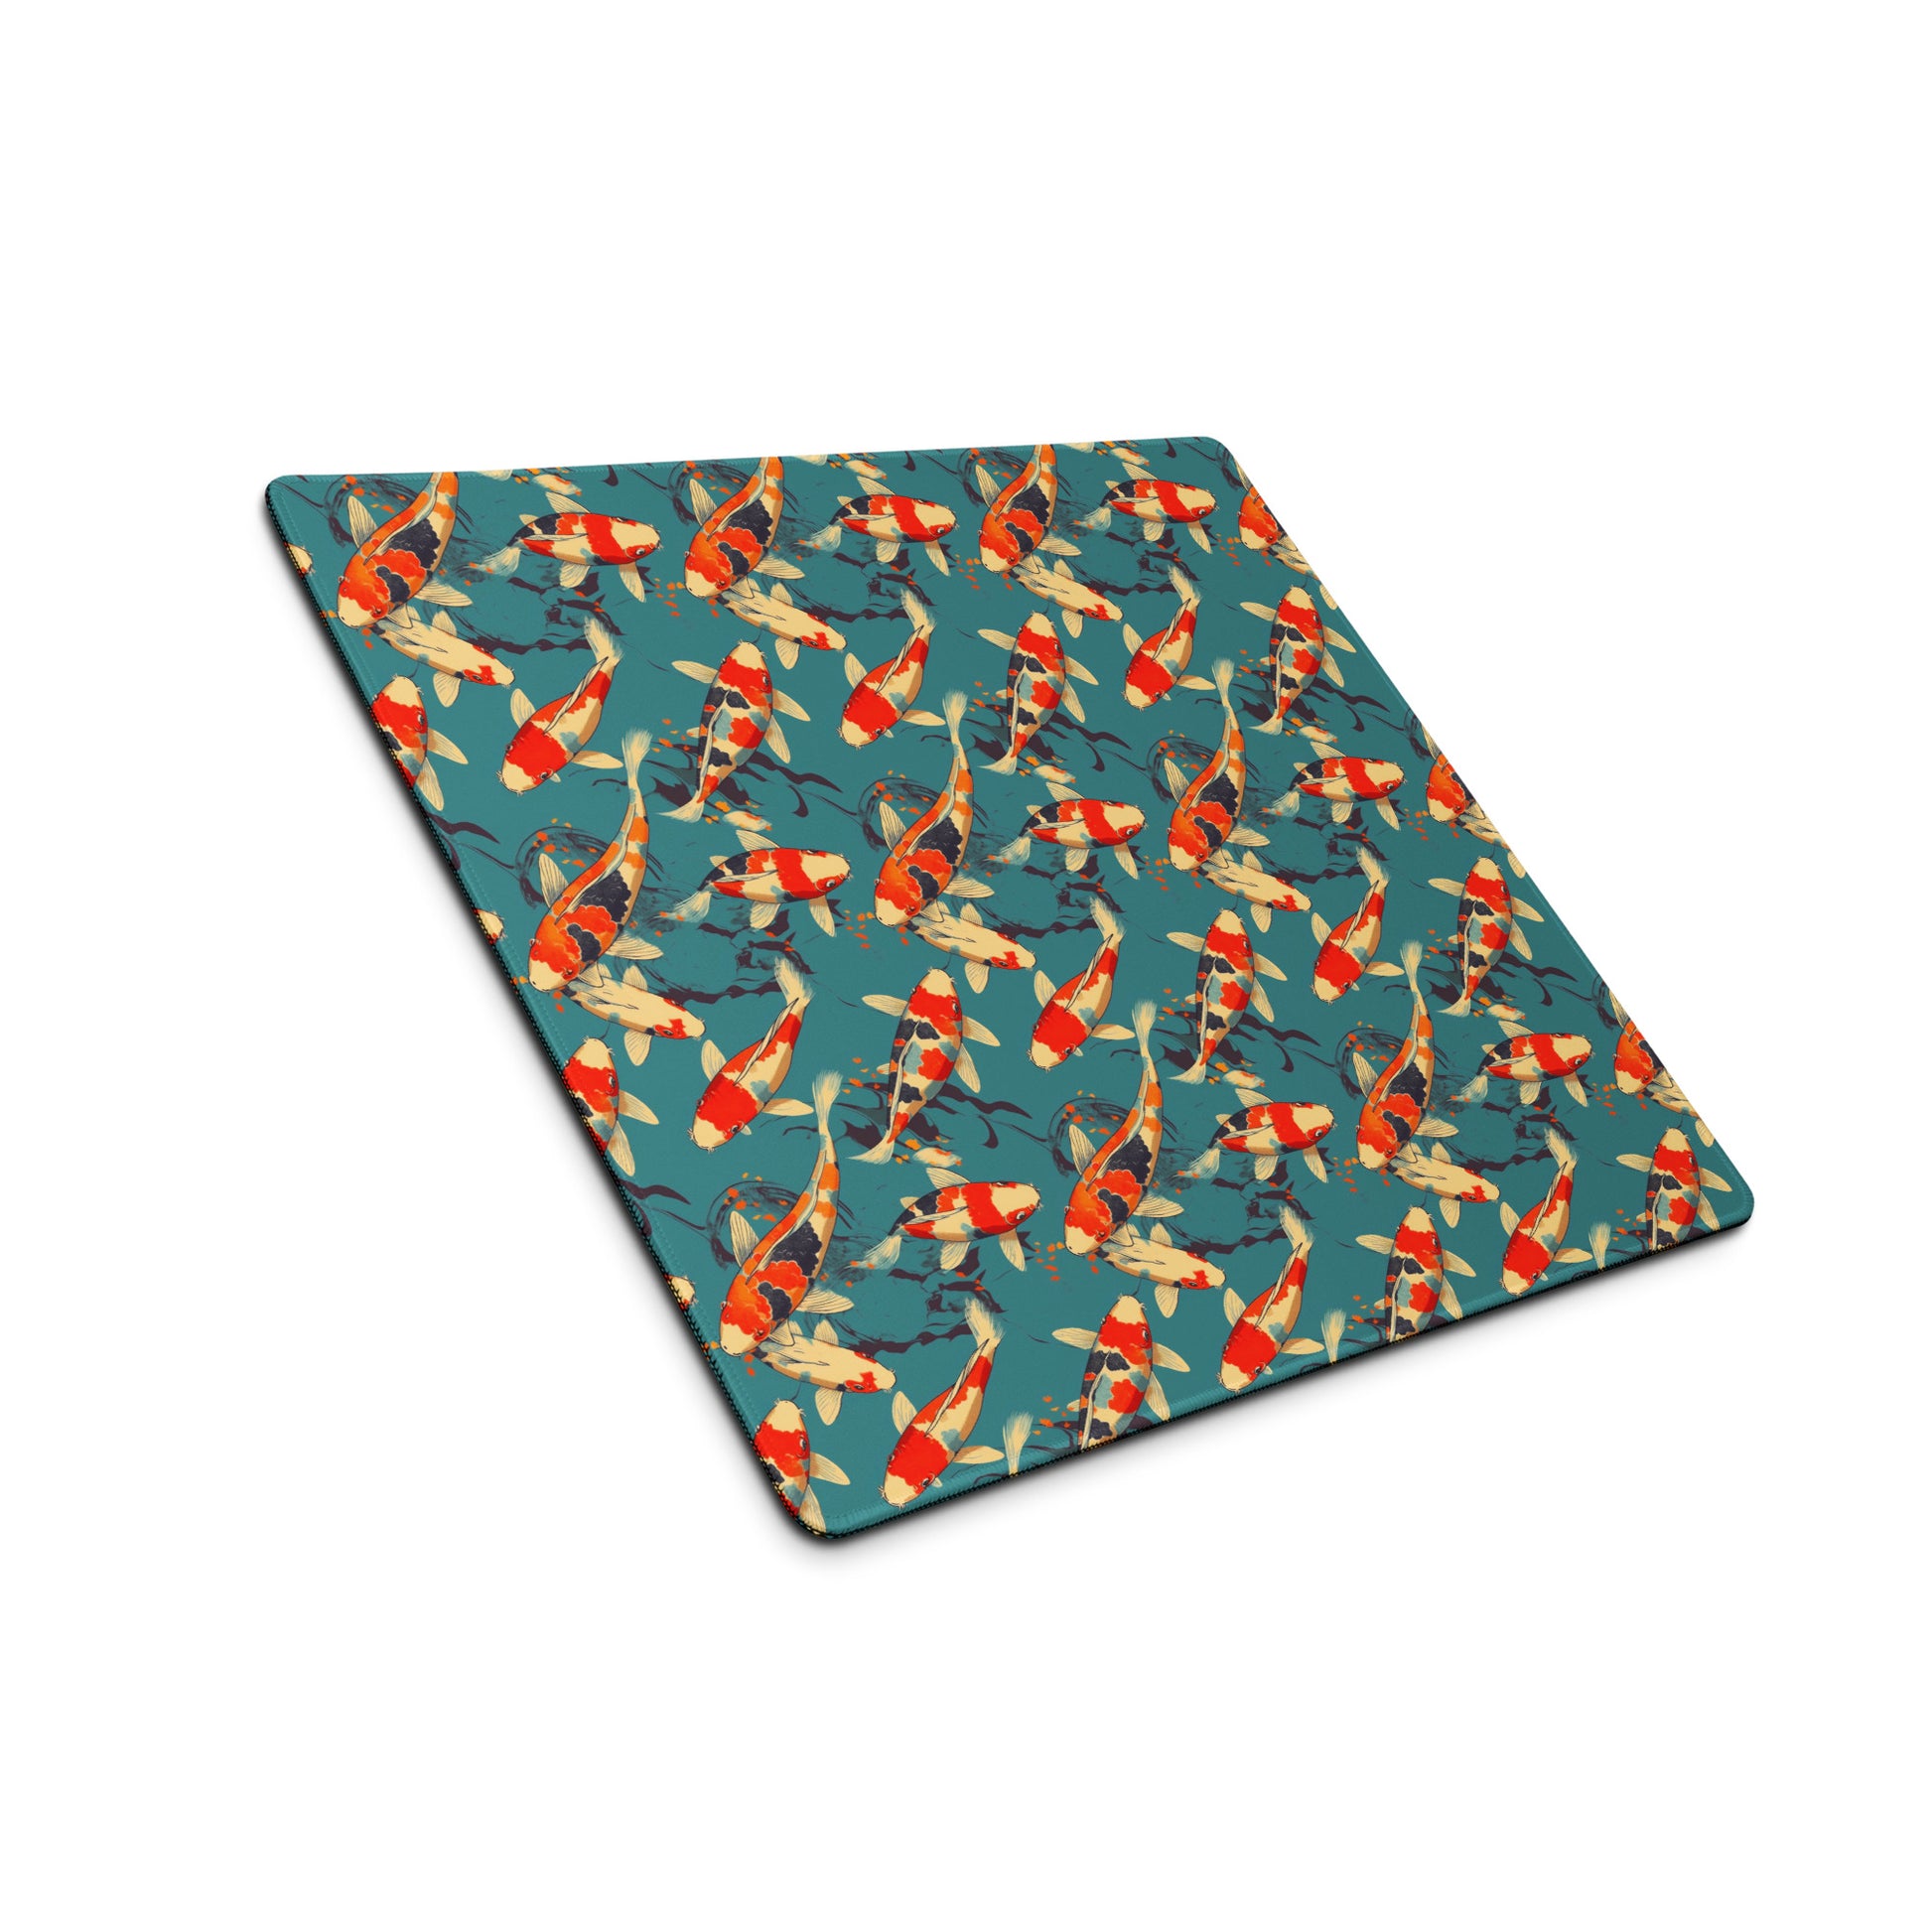 An 18" x 16" gaming desk pad with red koi fish on a blue background sitting at an angle.